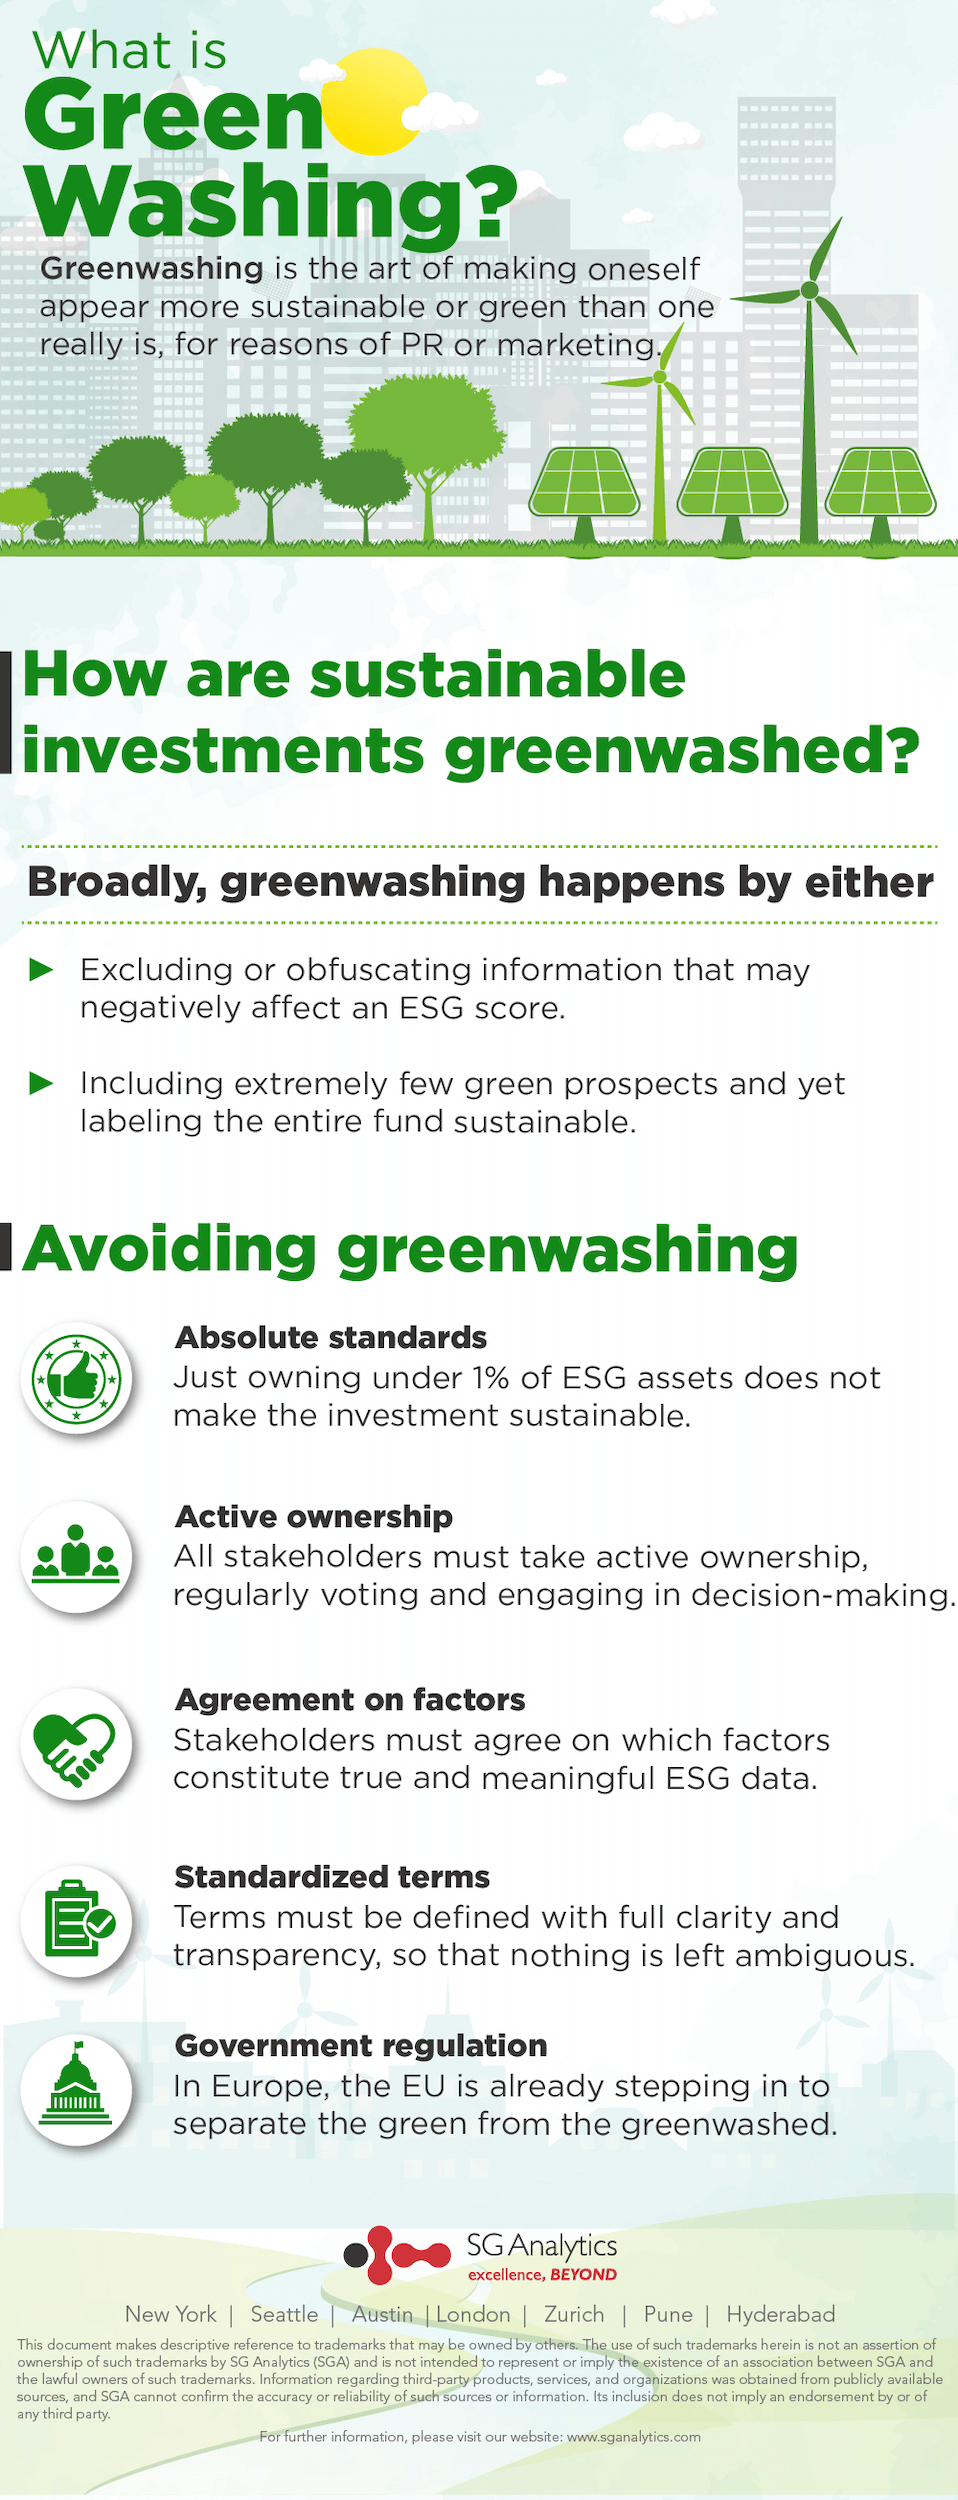 ESG Funds Institutional Vs. Non Institutional: What Is Green Washing